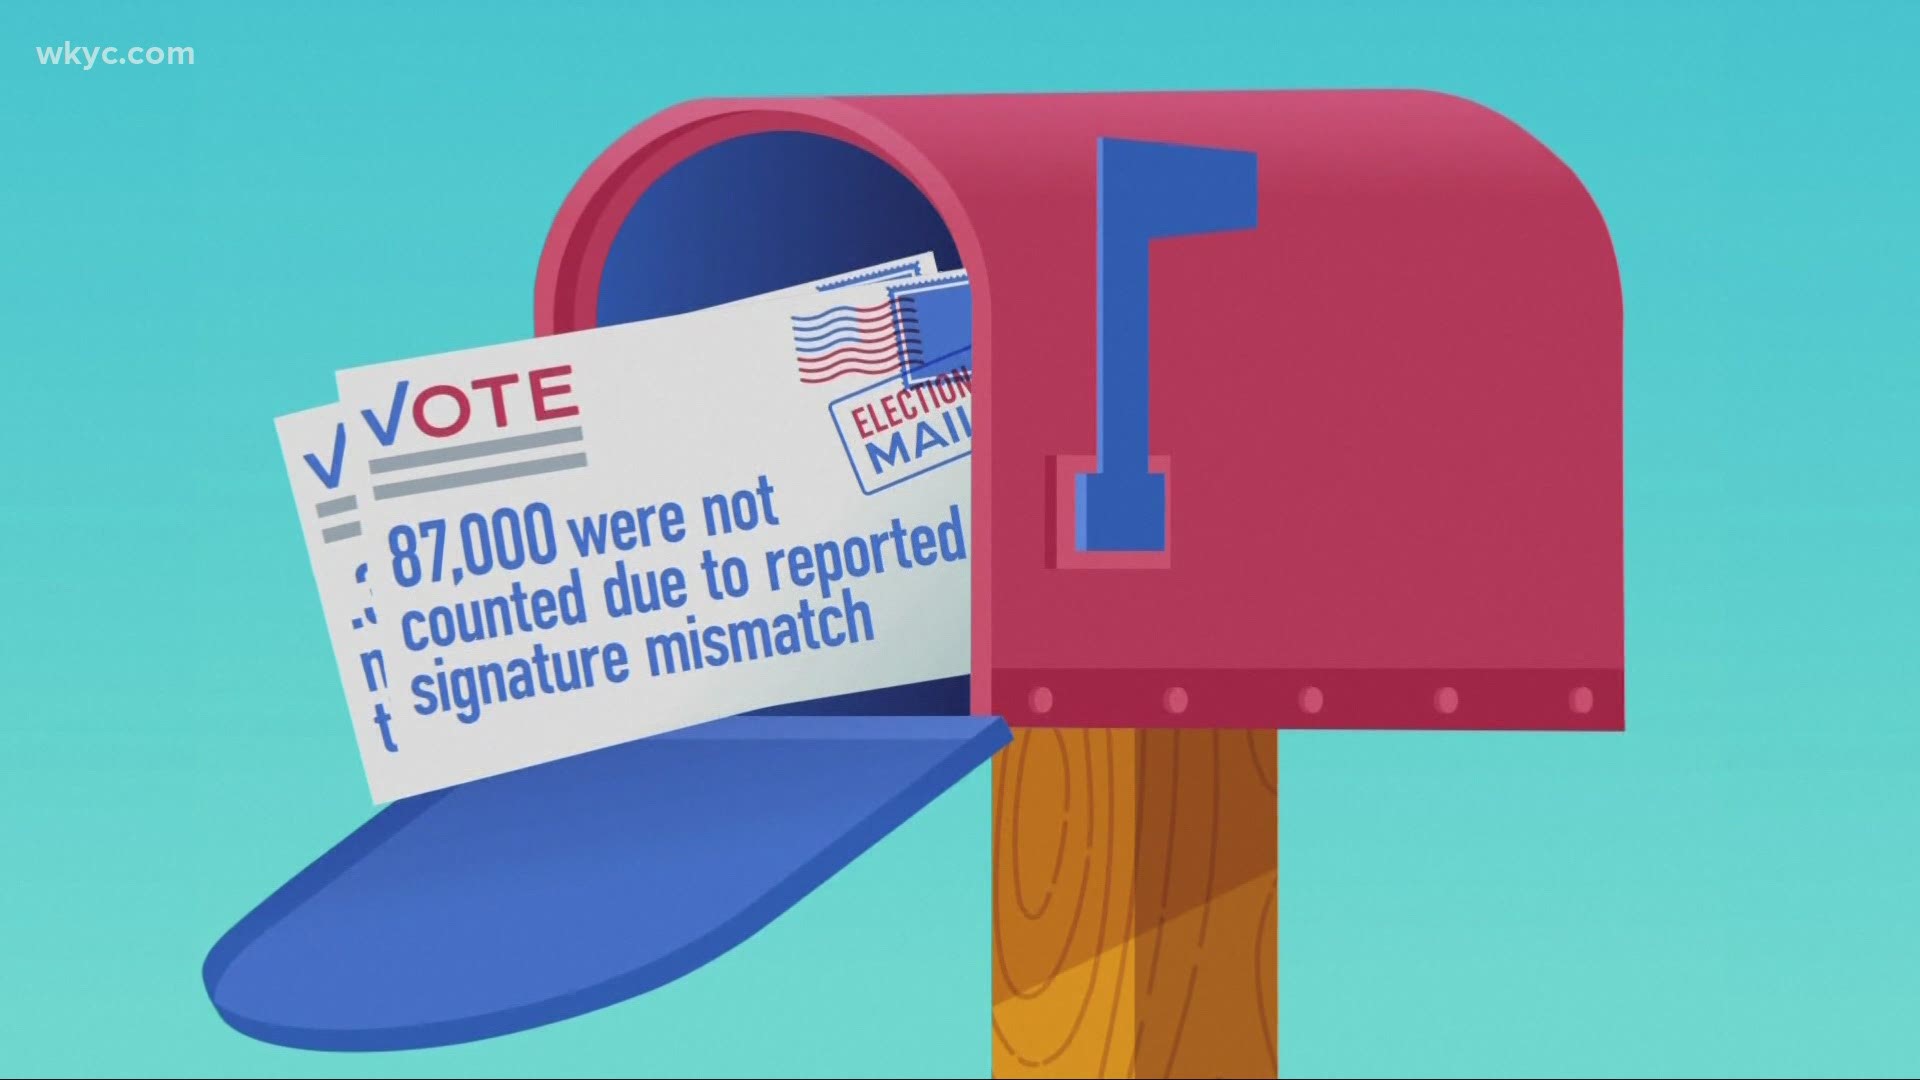 An abnormal signature could prevent your vote from being counted. Brandon Simmons reports.